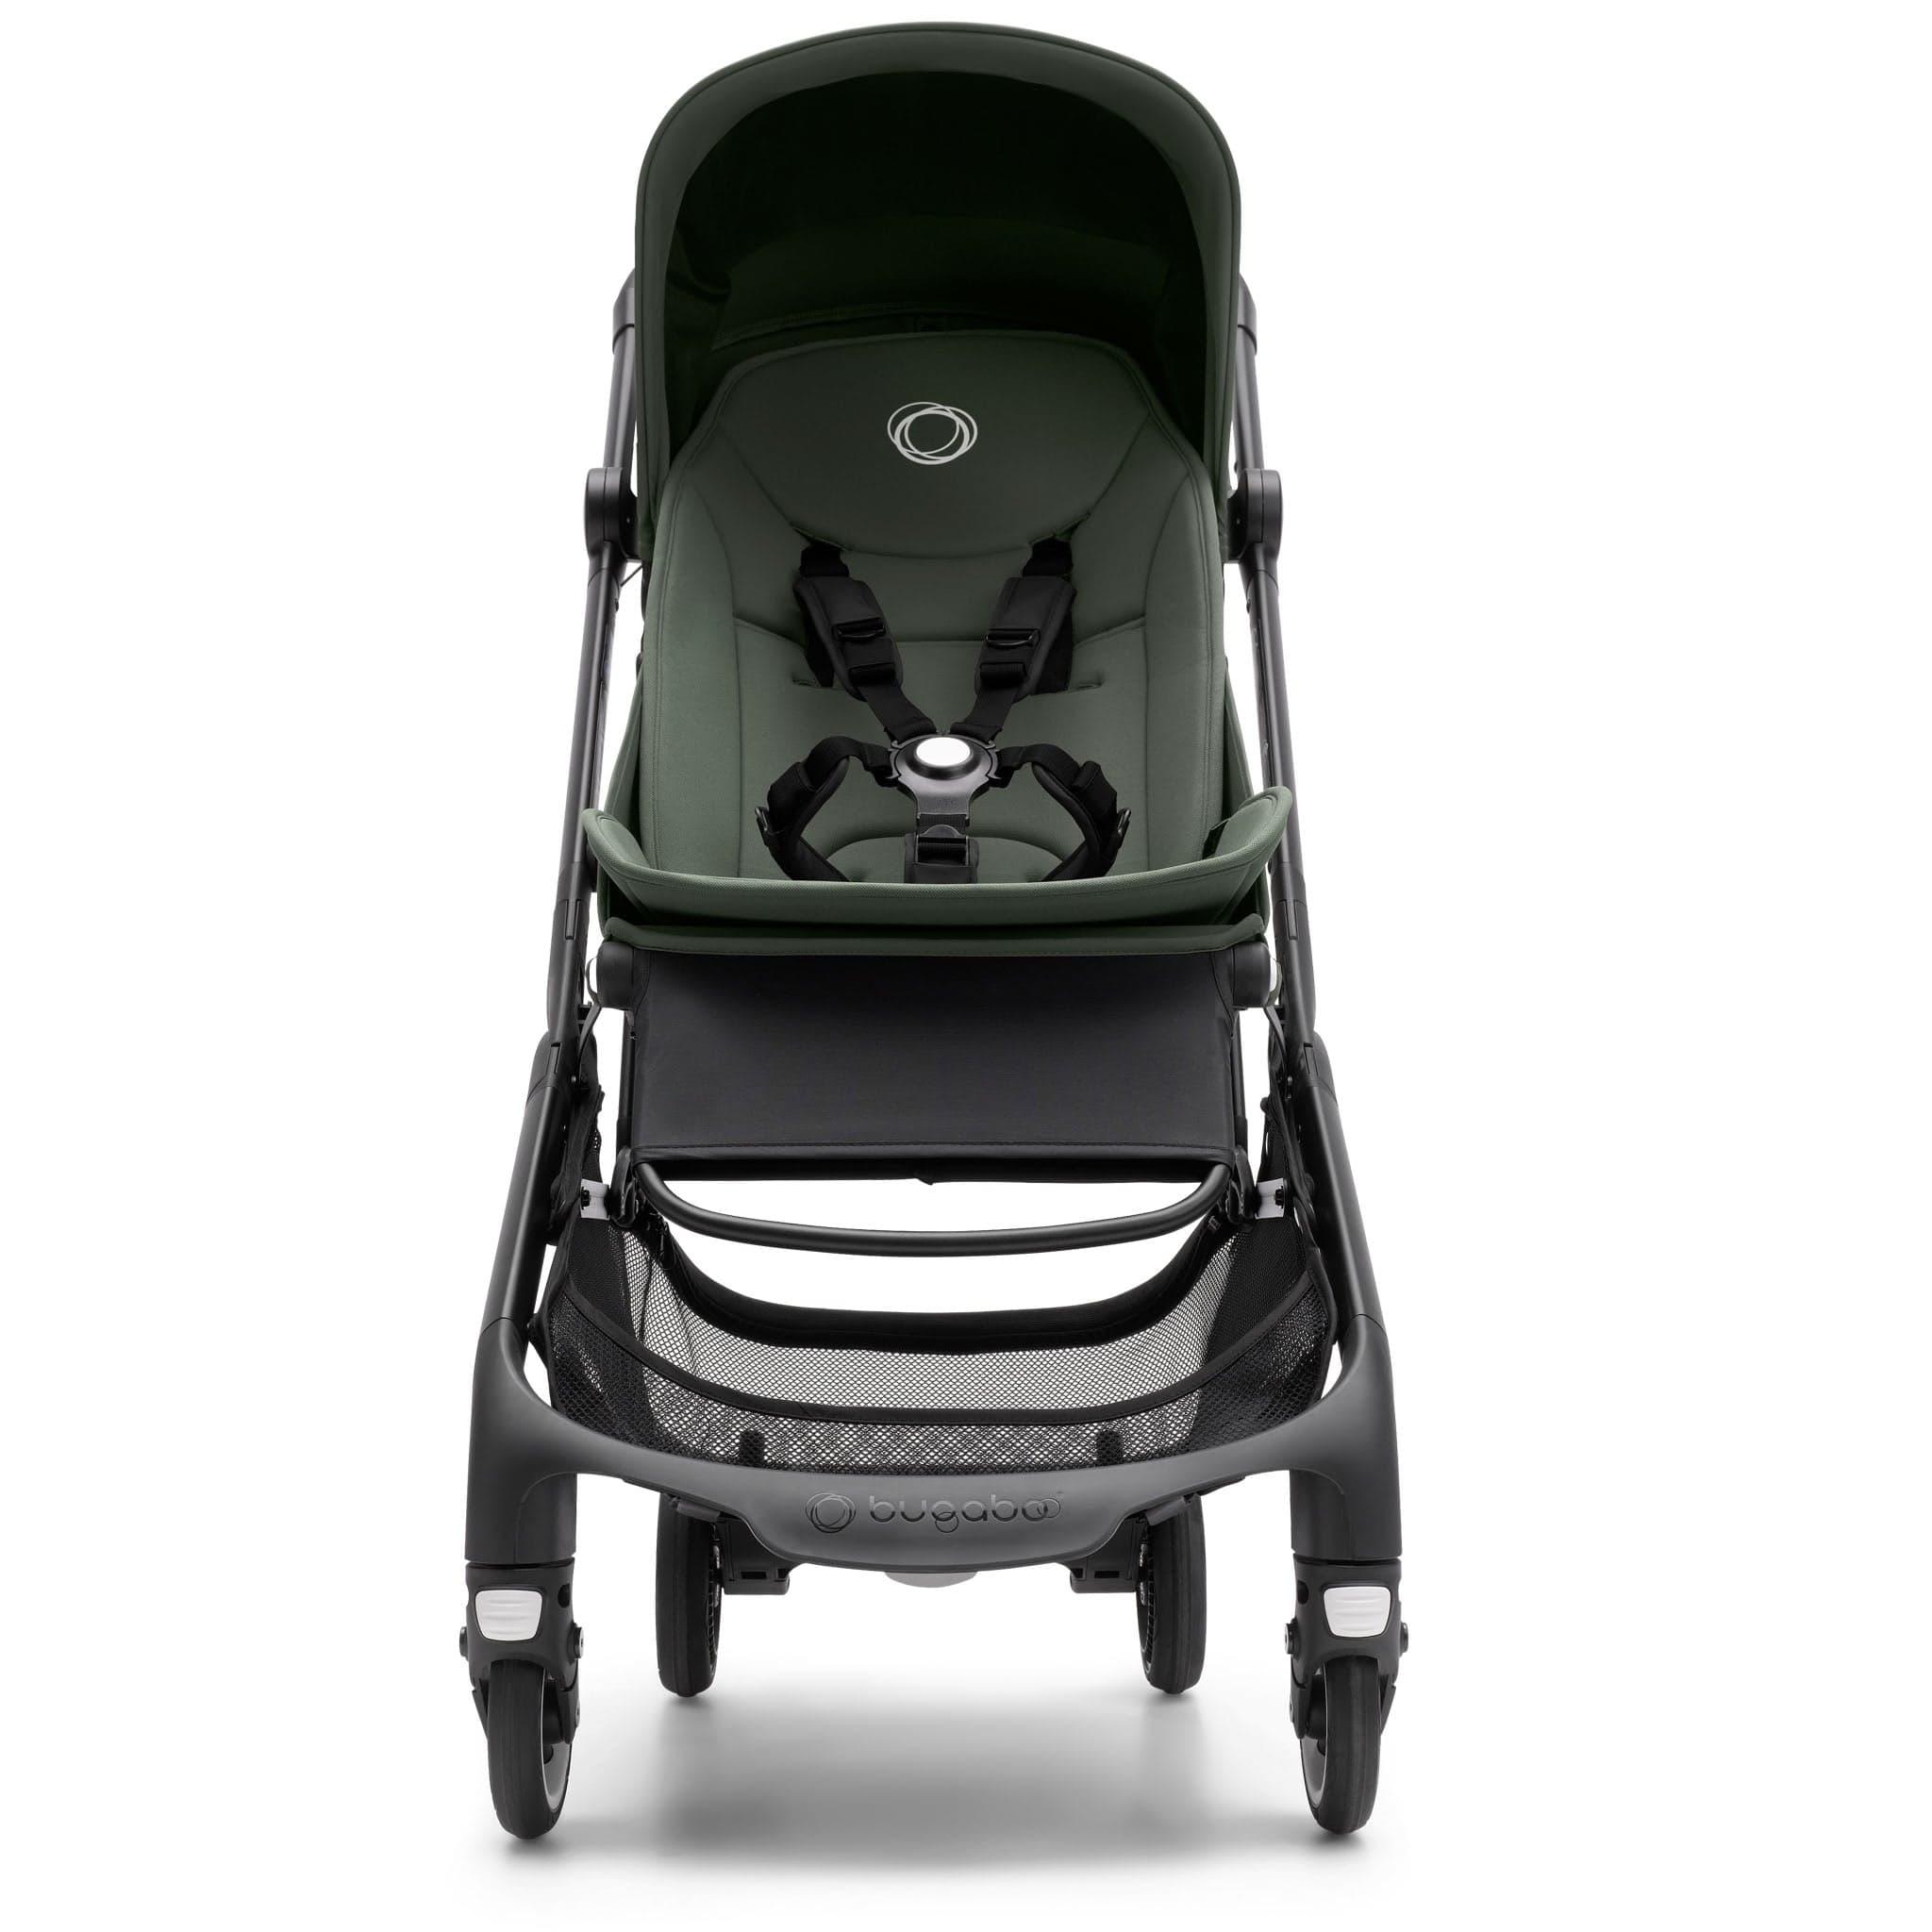 Bugaboo Butterfly in Forrest Green Pushchairs & Buggies 100025002 8717447363811